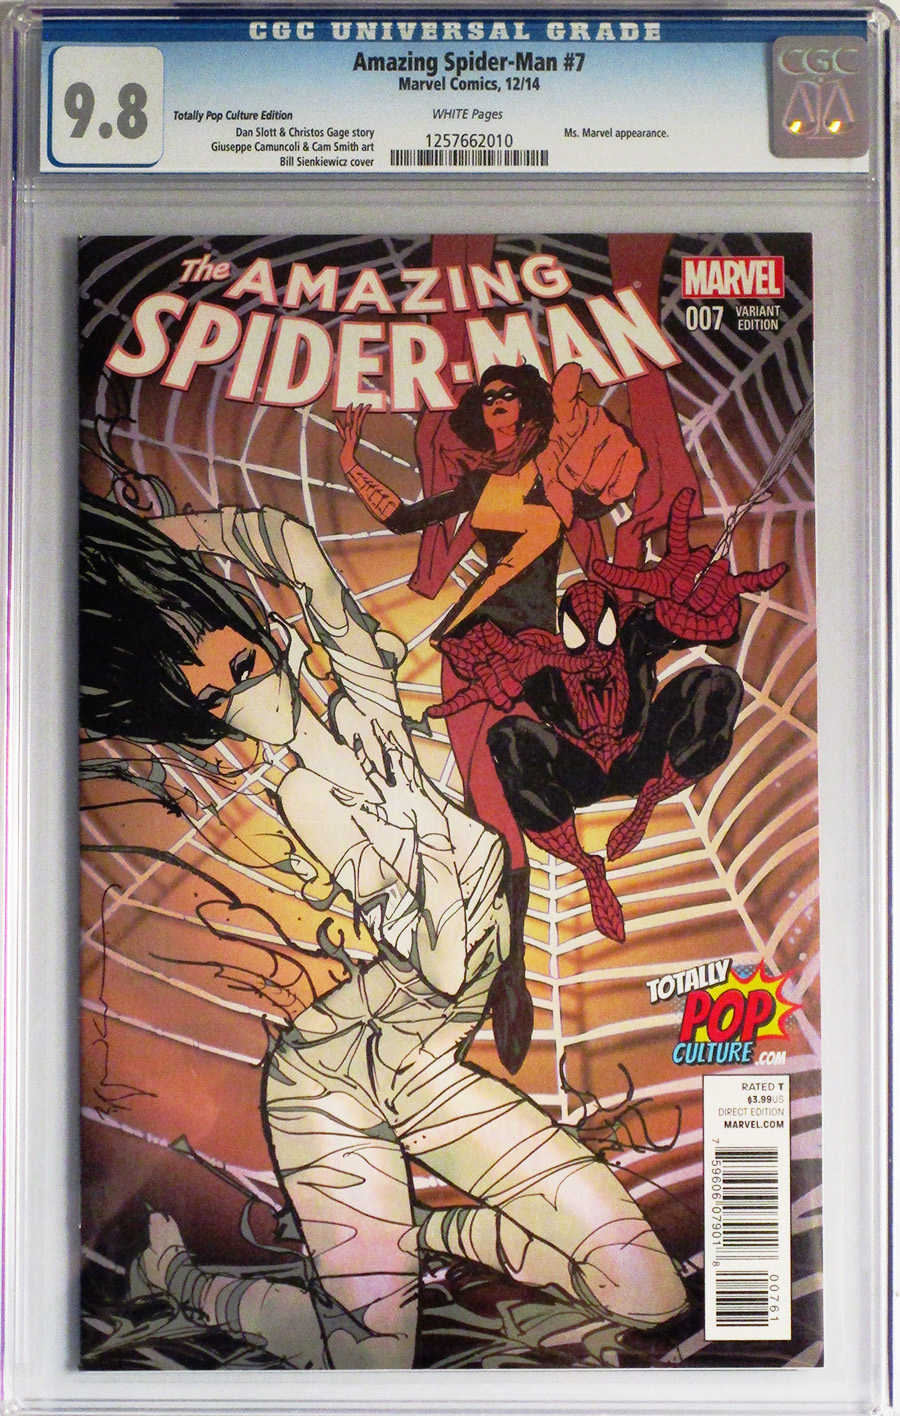 Amazing Spider-Man Vol 3 #7 Cover F CGC 9.8 Totally Pop Culture Edition